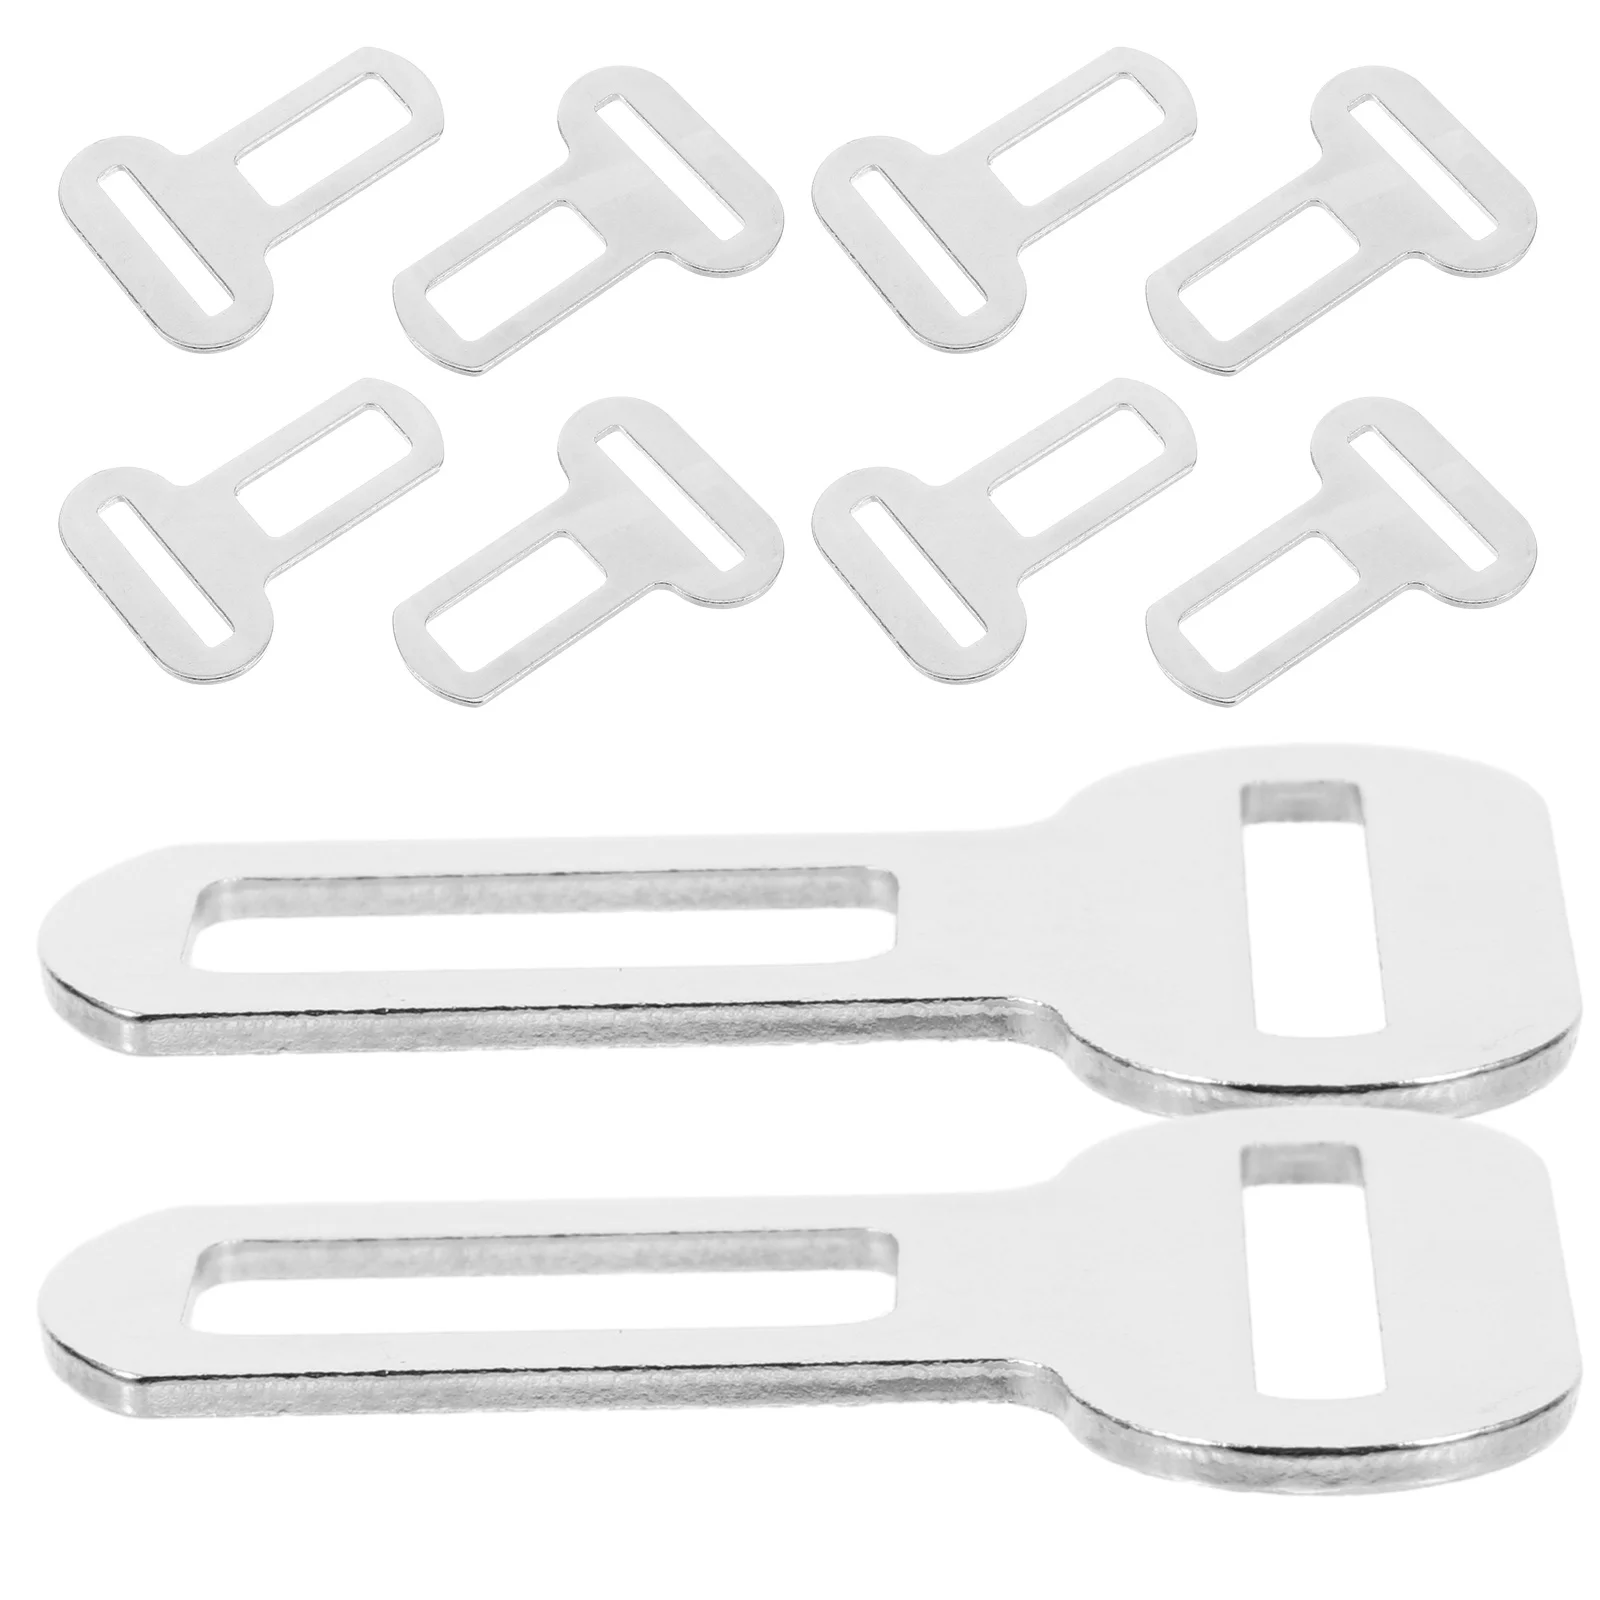 

10 Pcs Wallet Buckle Seatbelt Fastener Buckles Securing Accessories Iron Sheets Attachment Dog Cushioning Webbing Chain